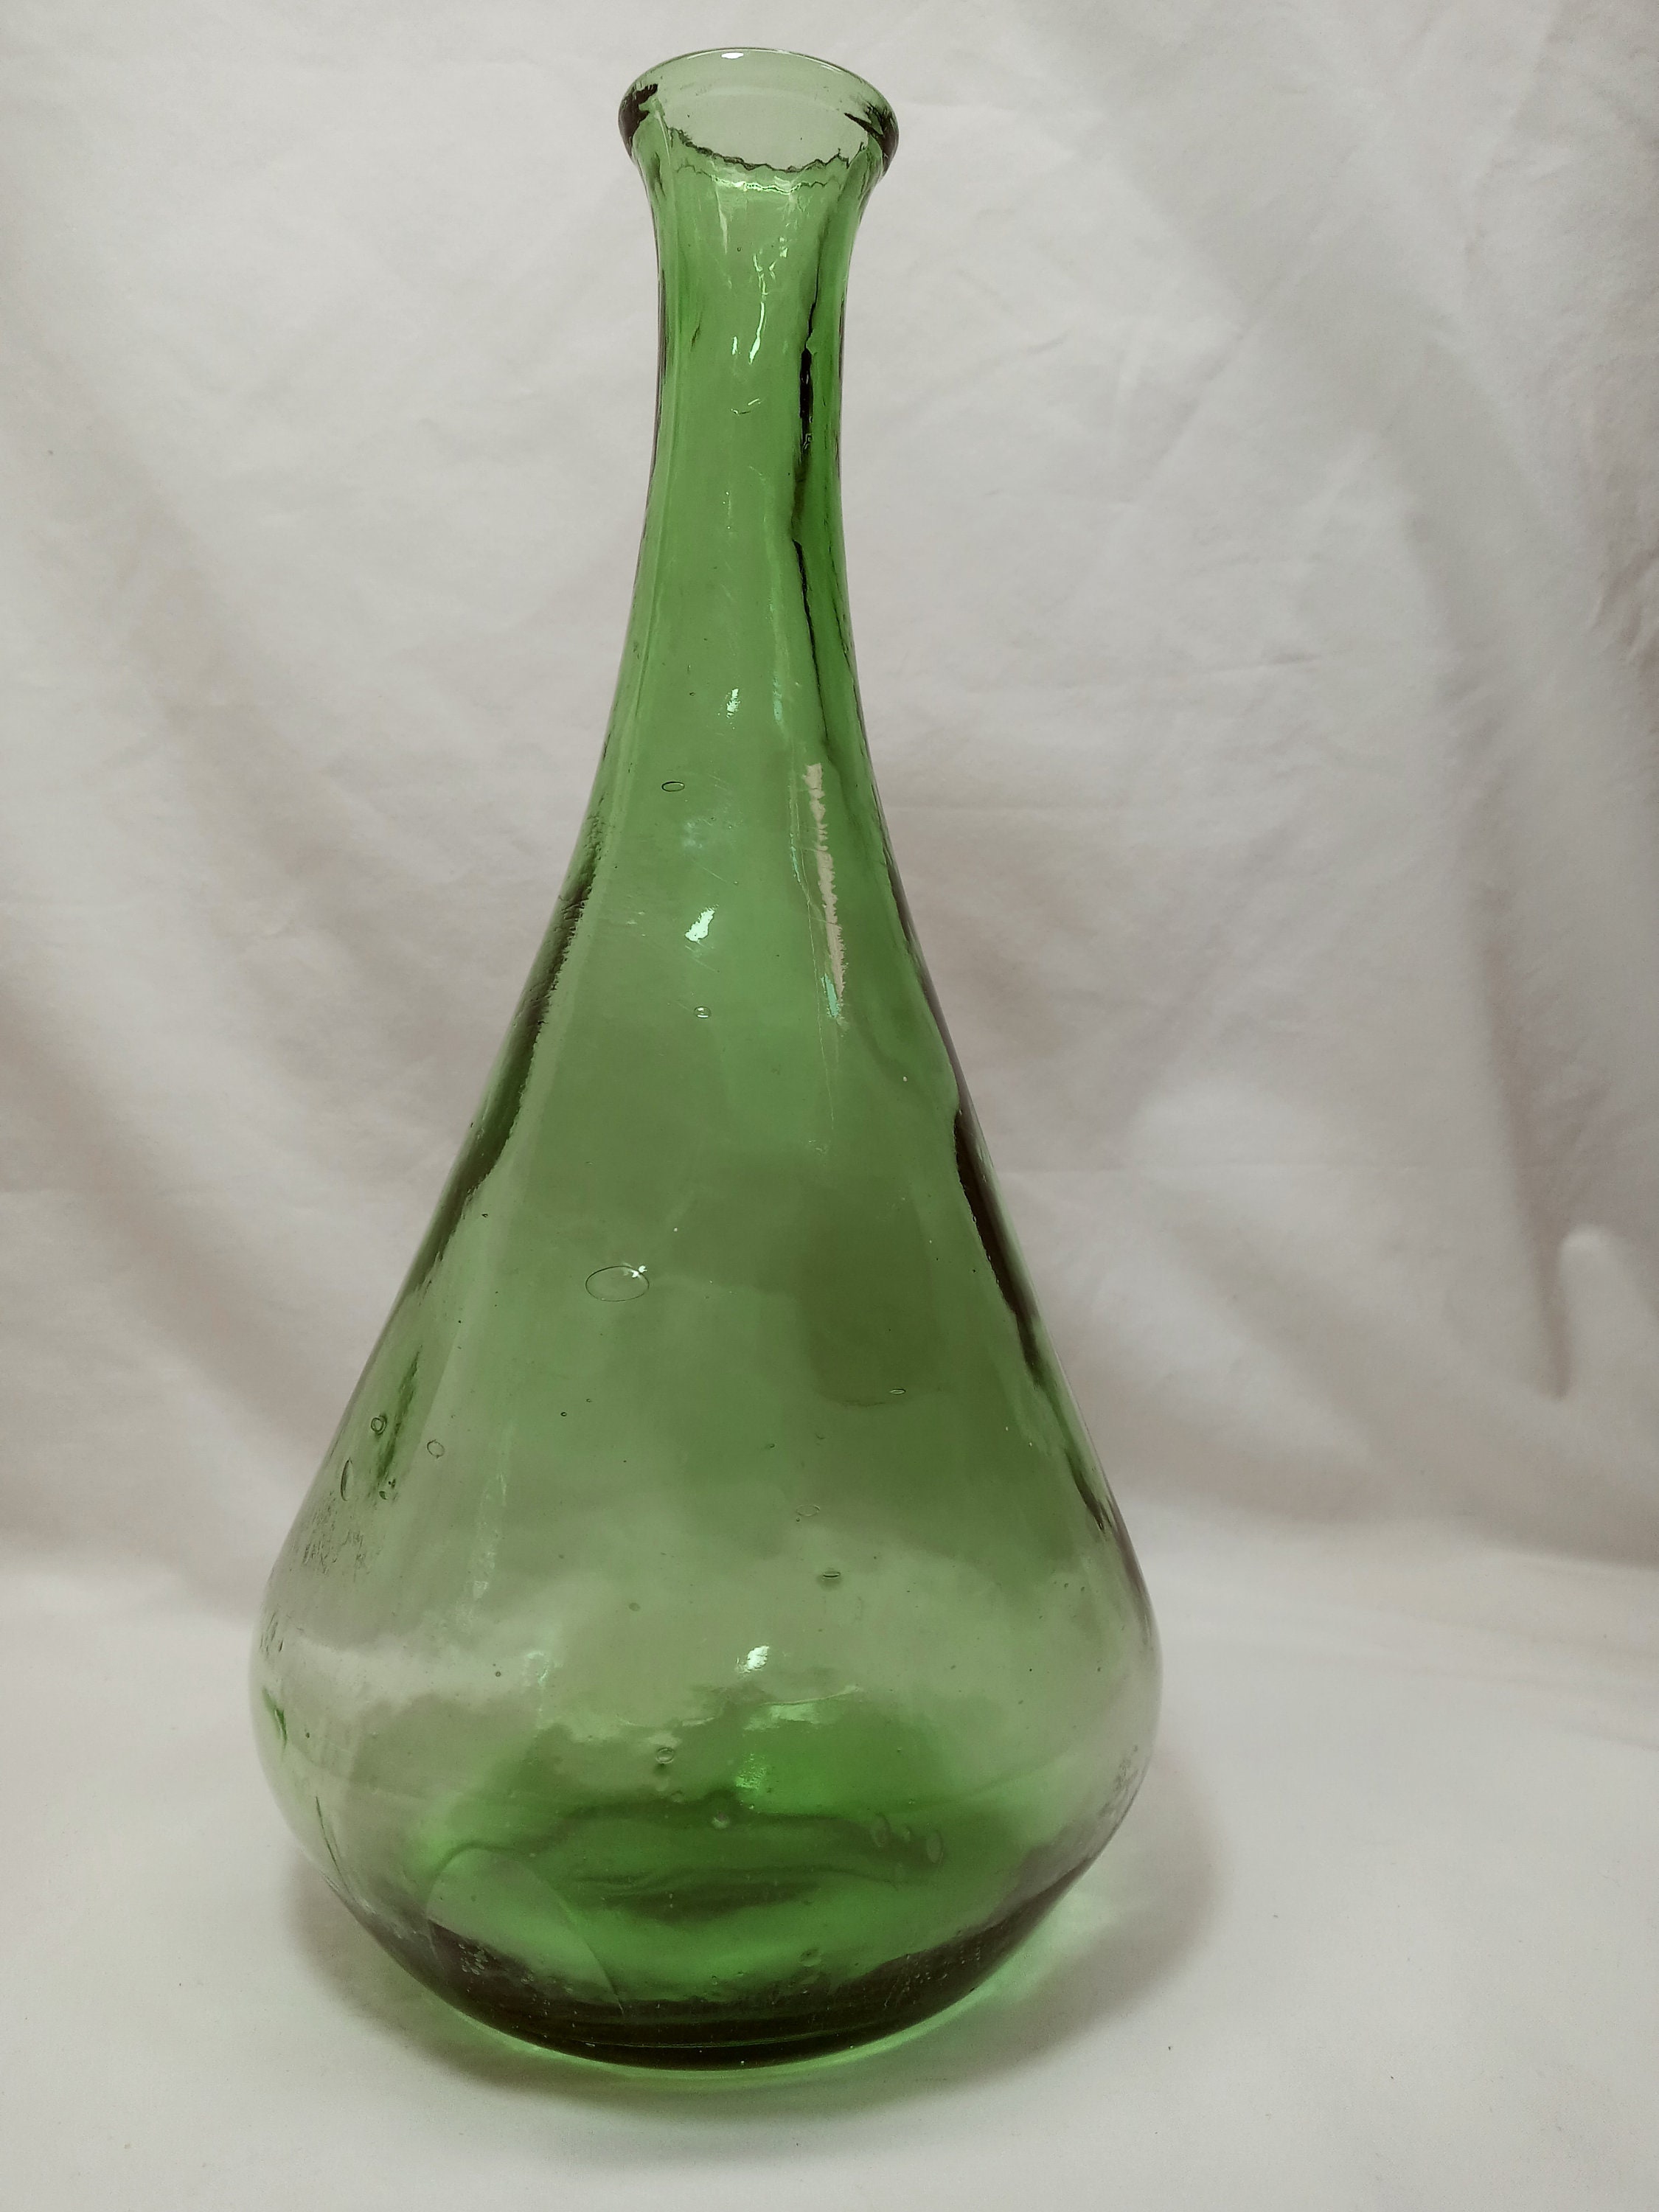 Vintage Maybe Antique Green Glass Bottle With Mold Seam And Etsy